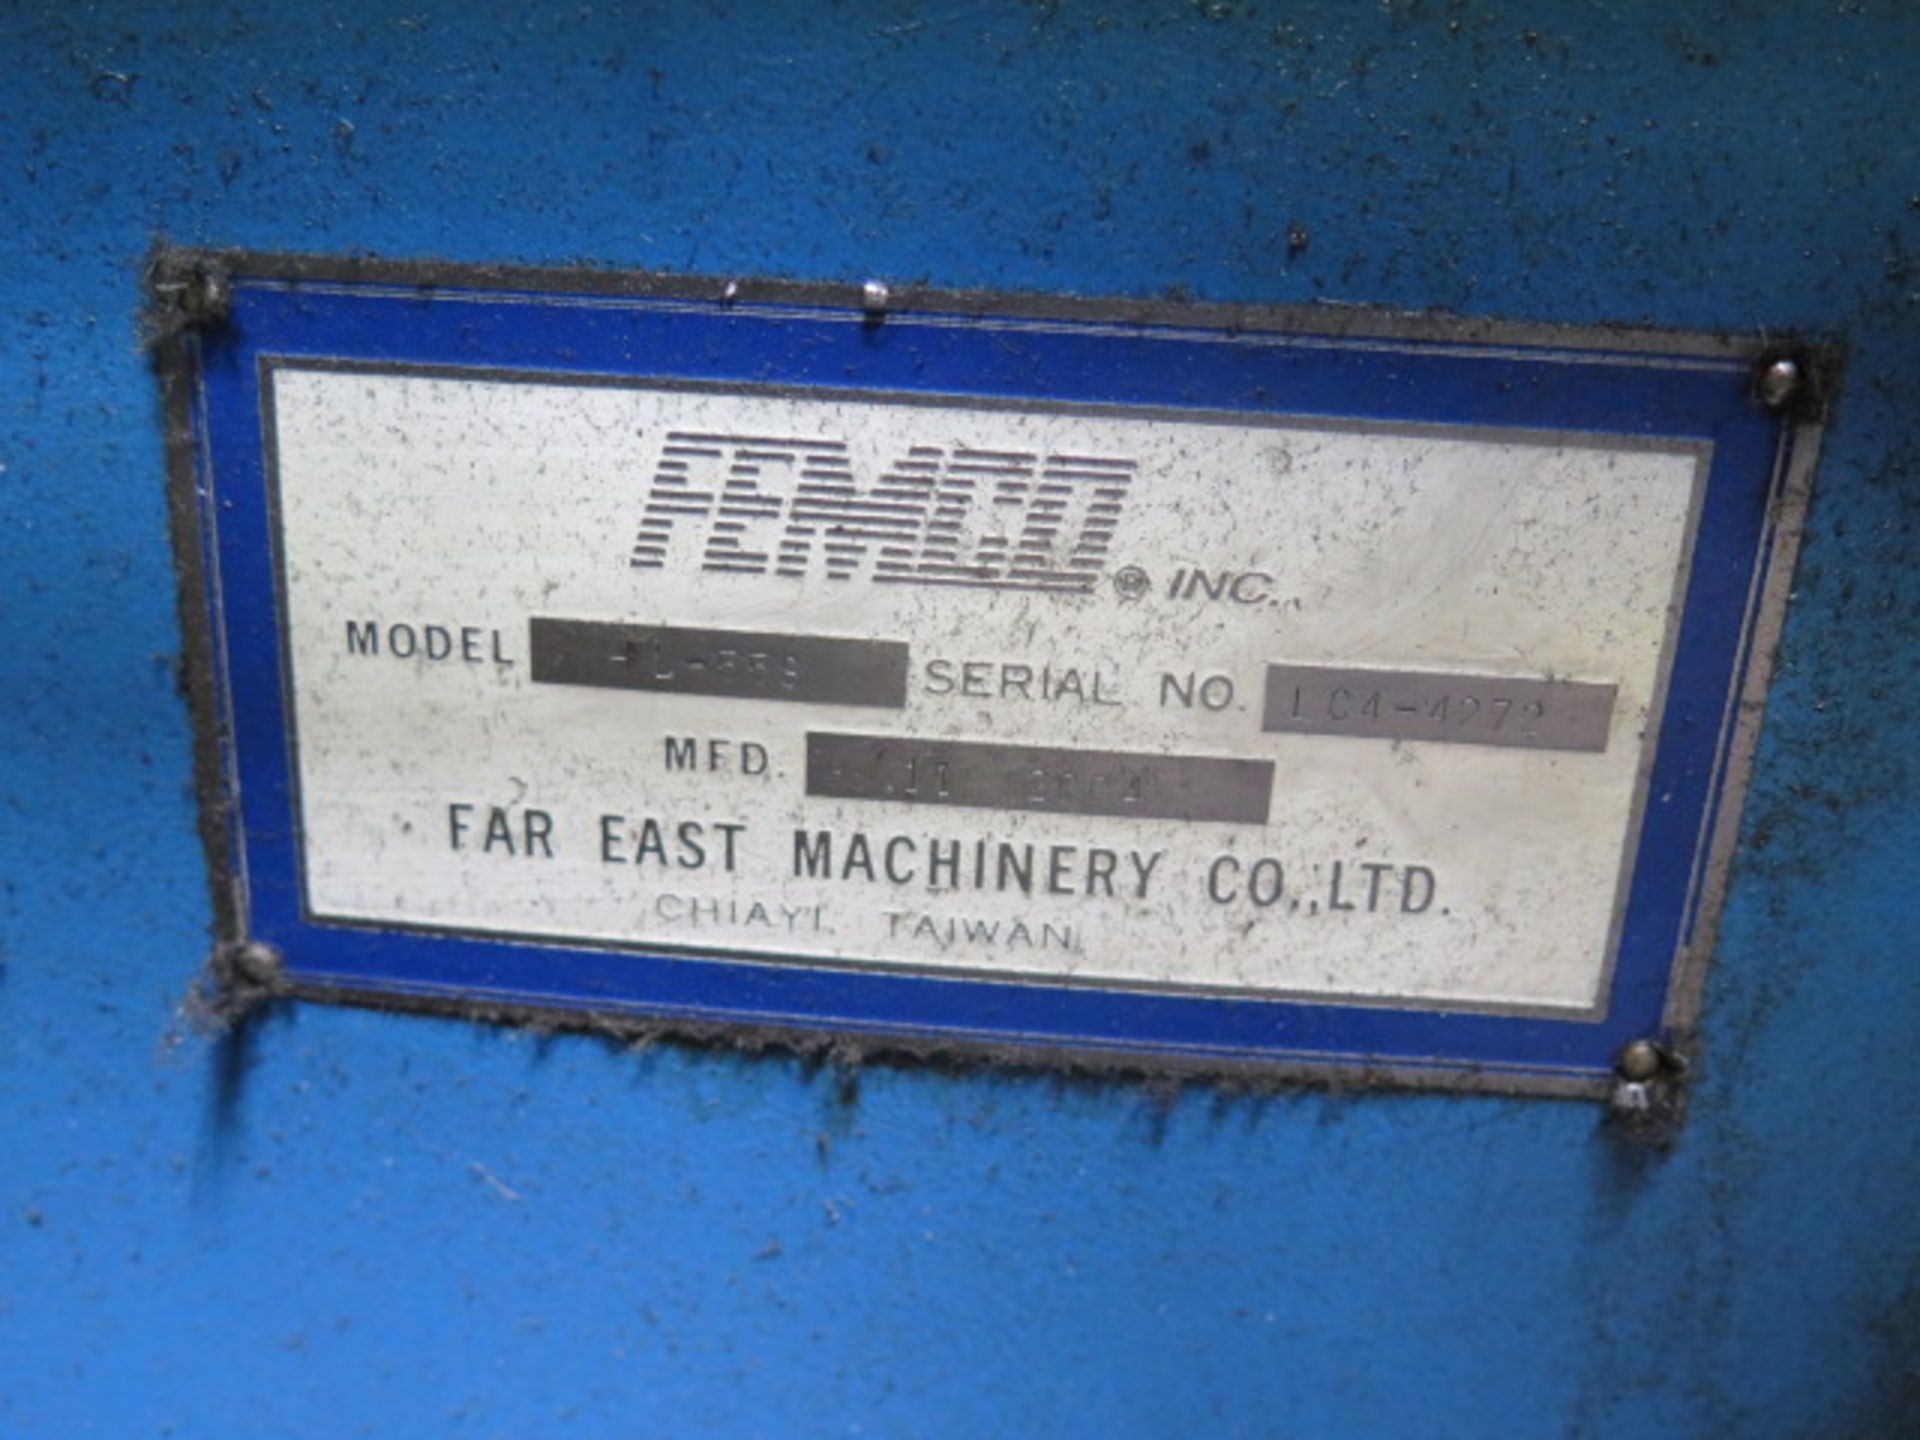 Femco HL-55S CNC Turning Center (TOOLING NOT INCLUDED) w/ Fanuc 18-T Controls, 12-Station,SOLD AS IS - Image 14 of 15